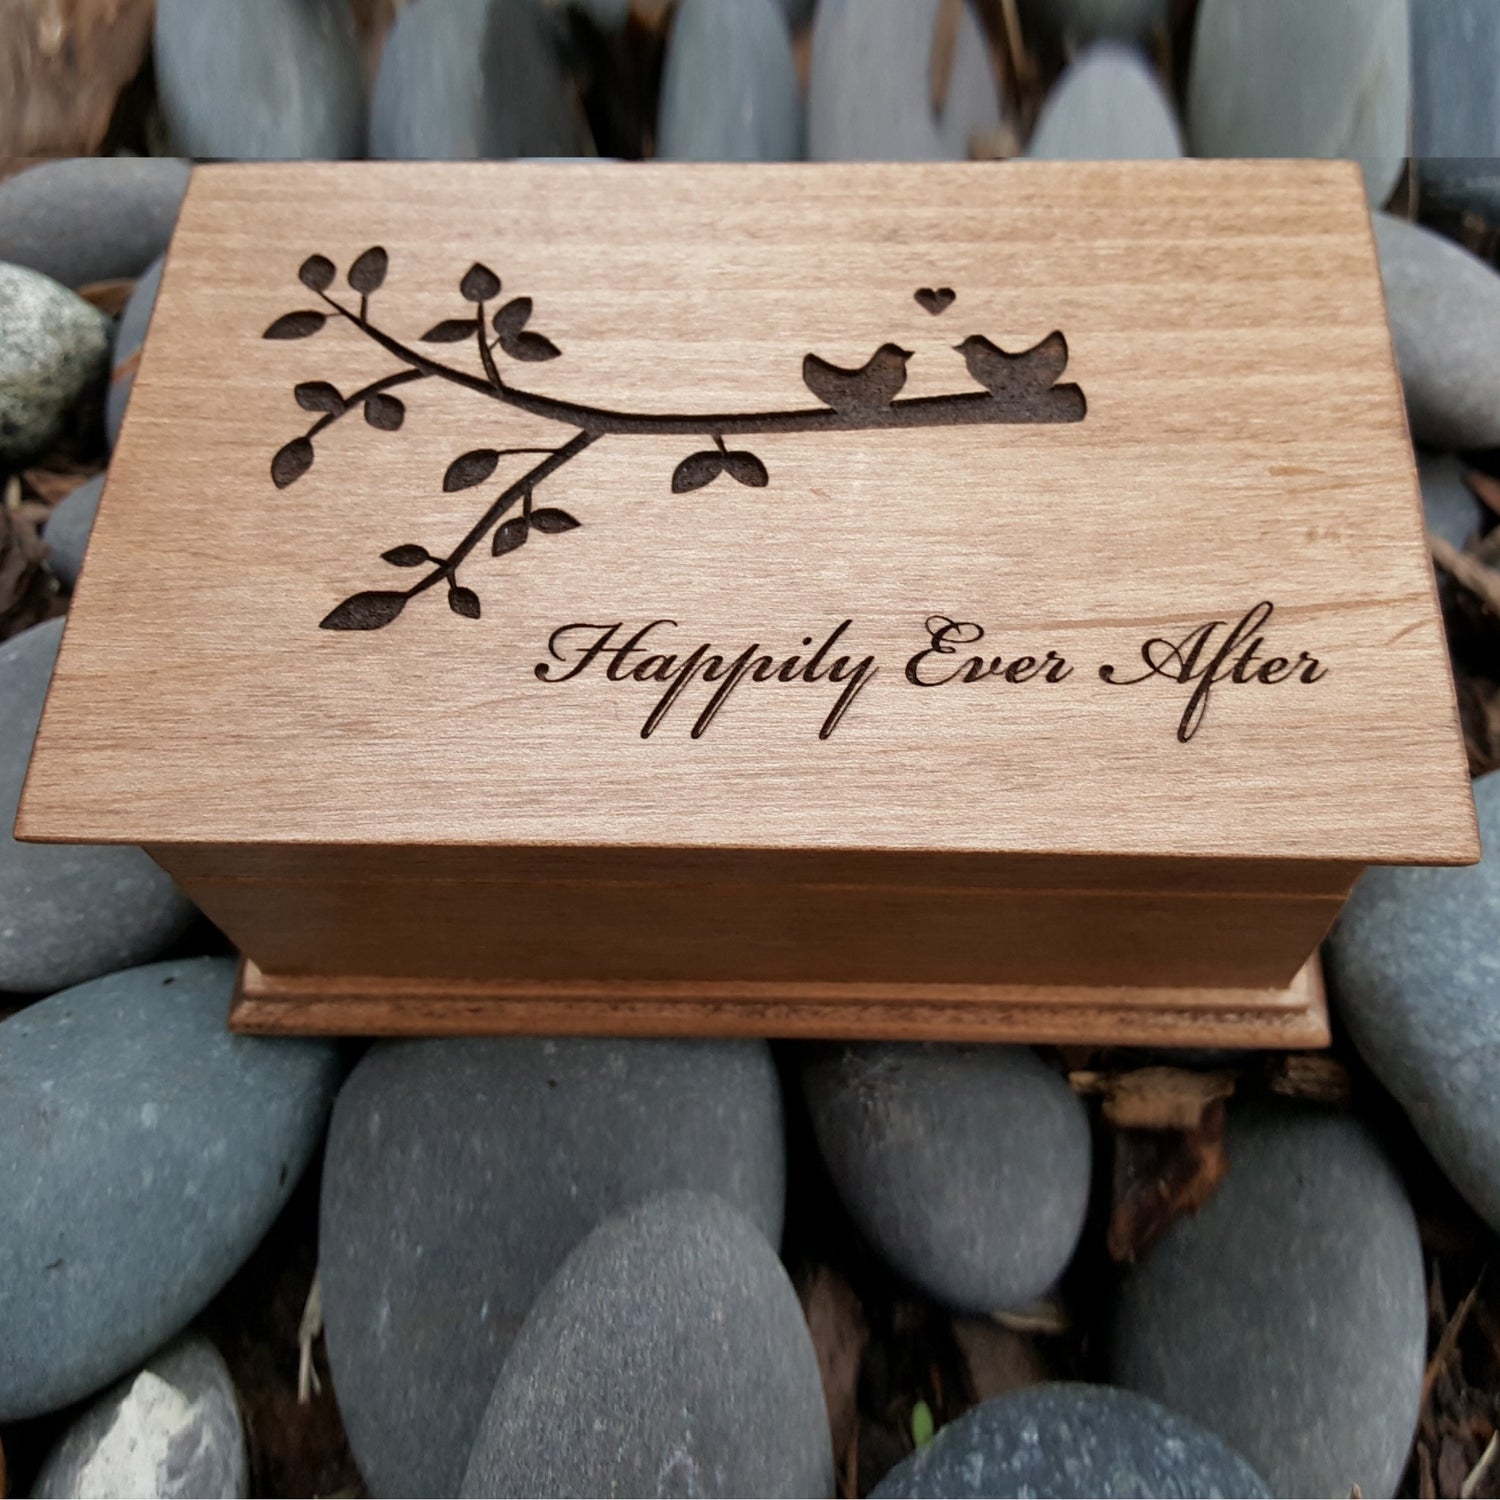 Happily Ever After engraved jewelry box with love birds sitting on a branch with built in music player